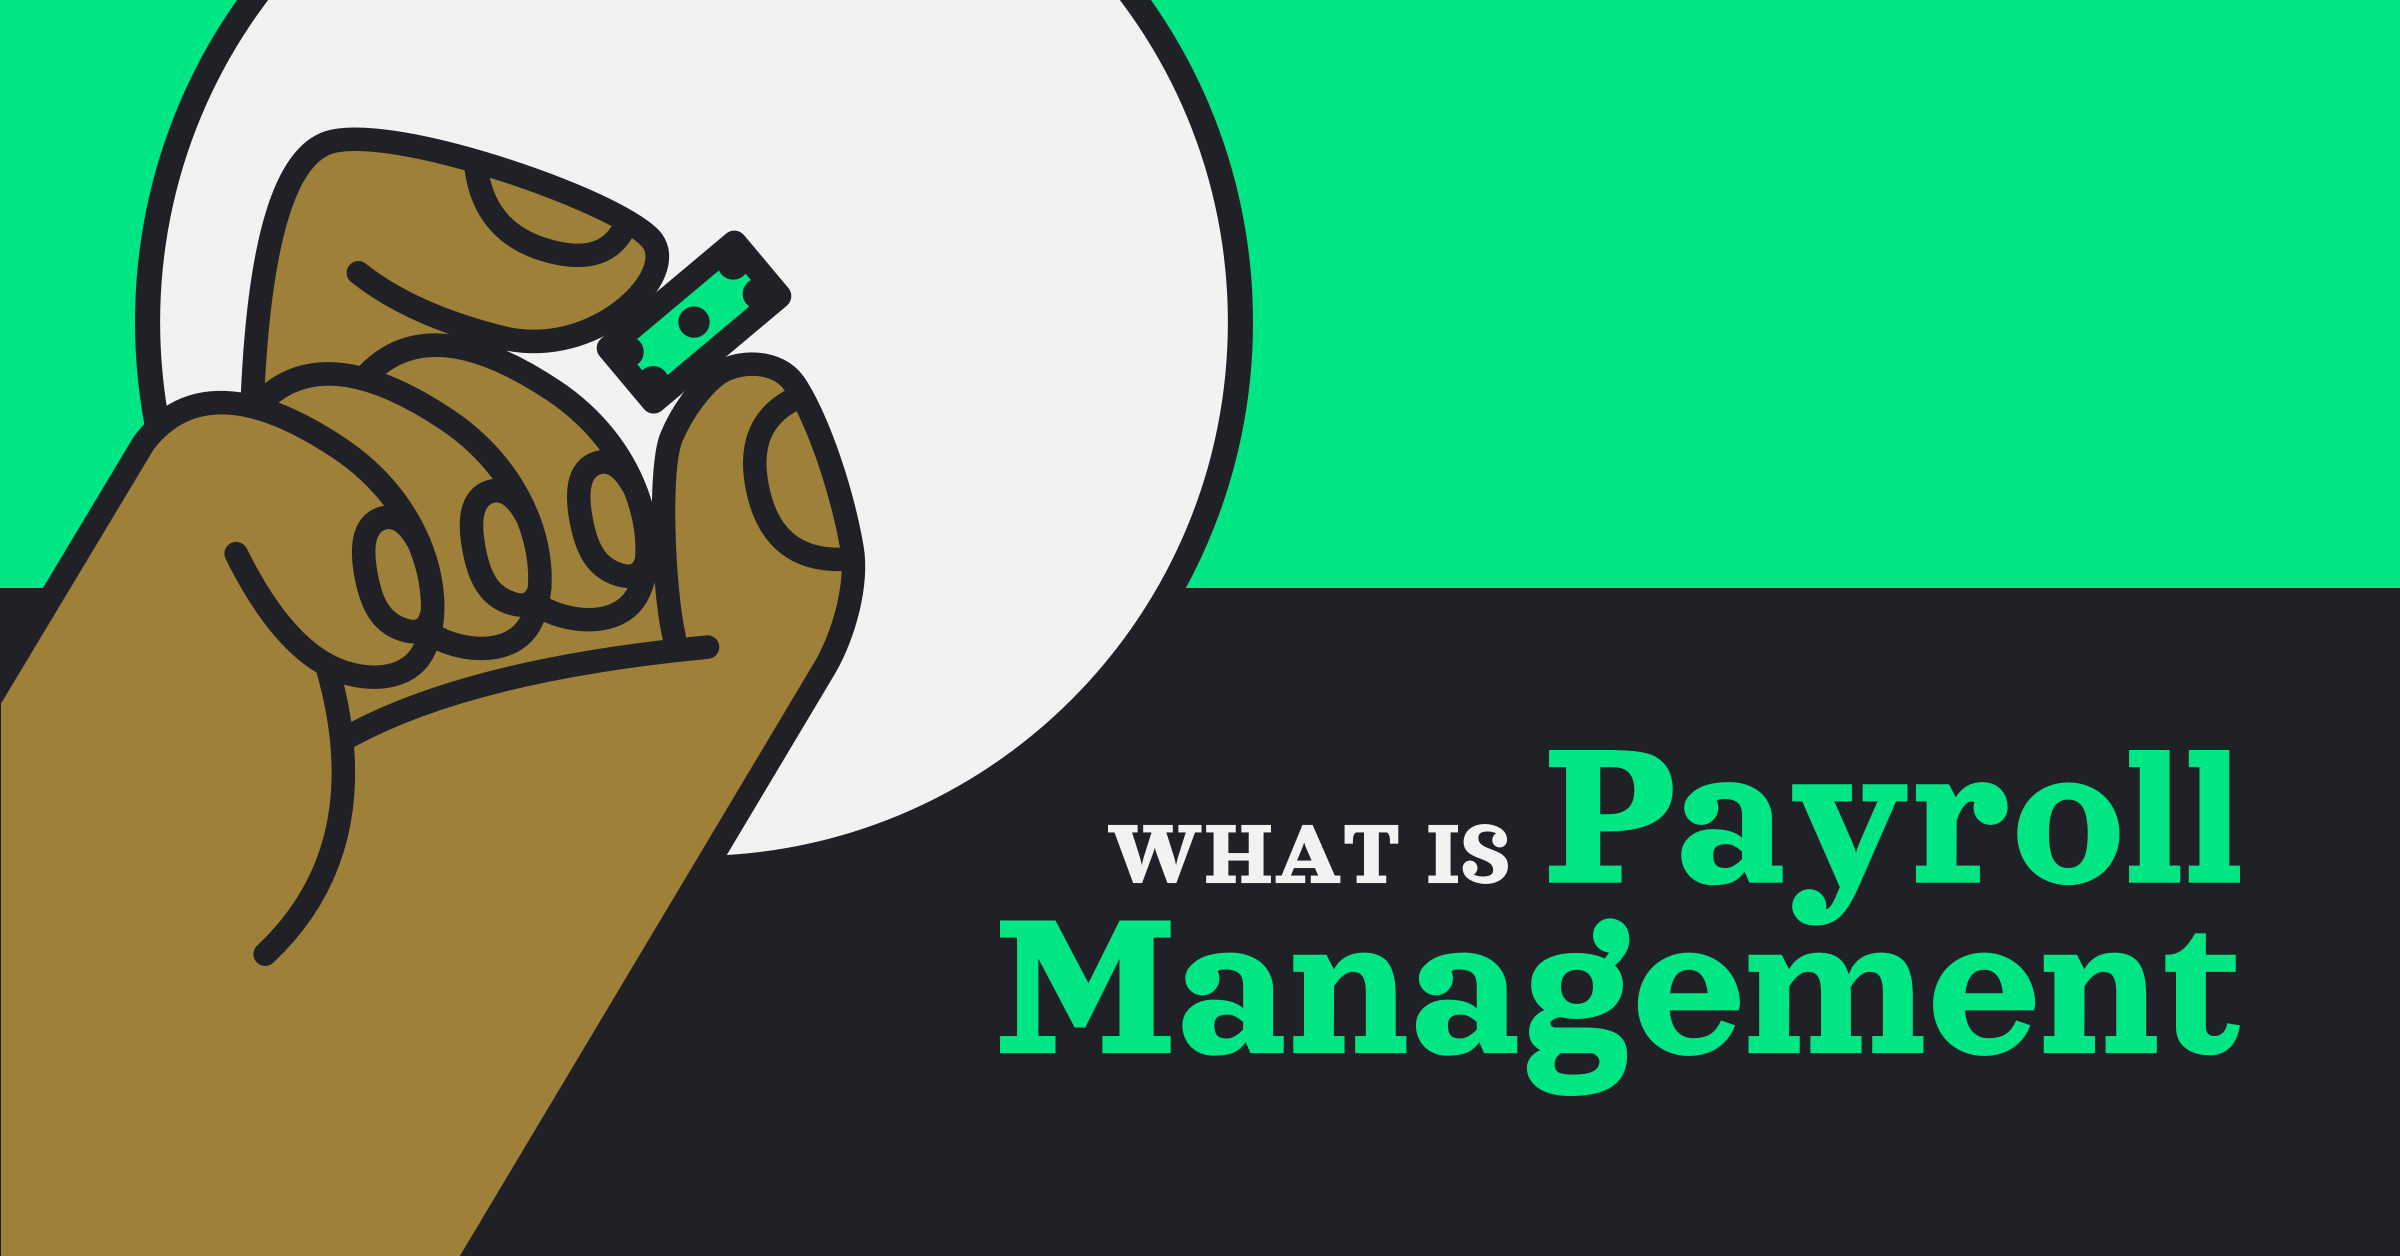 What Is Payroll Management When I Work 5658